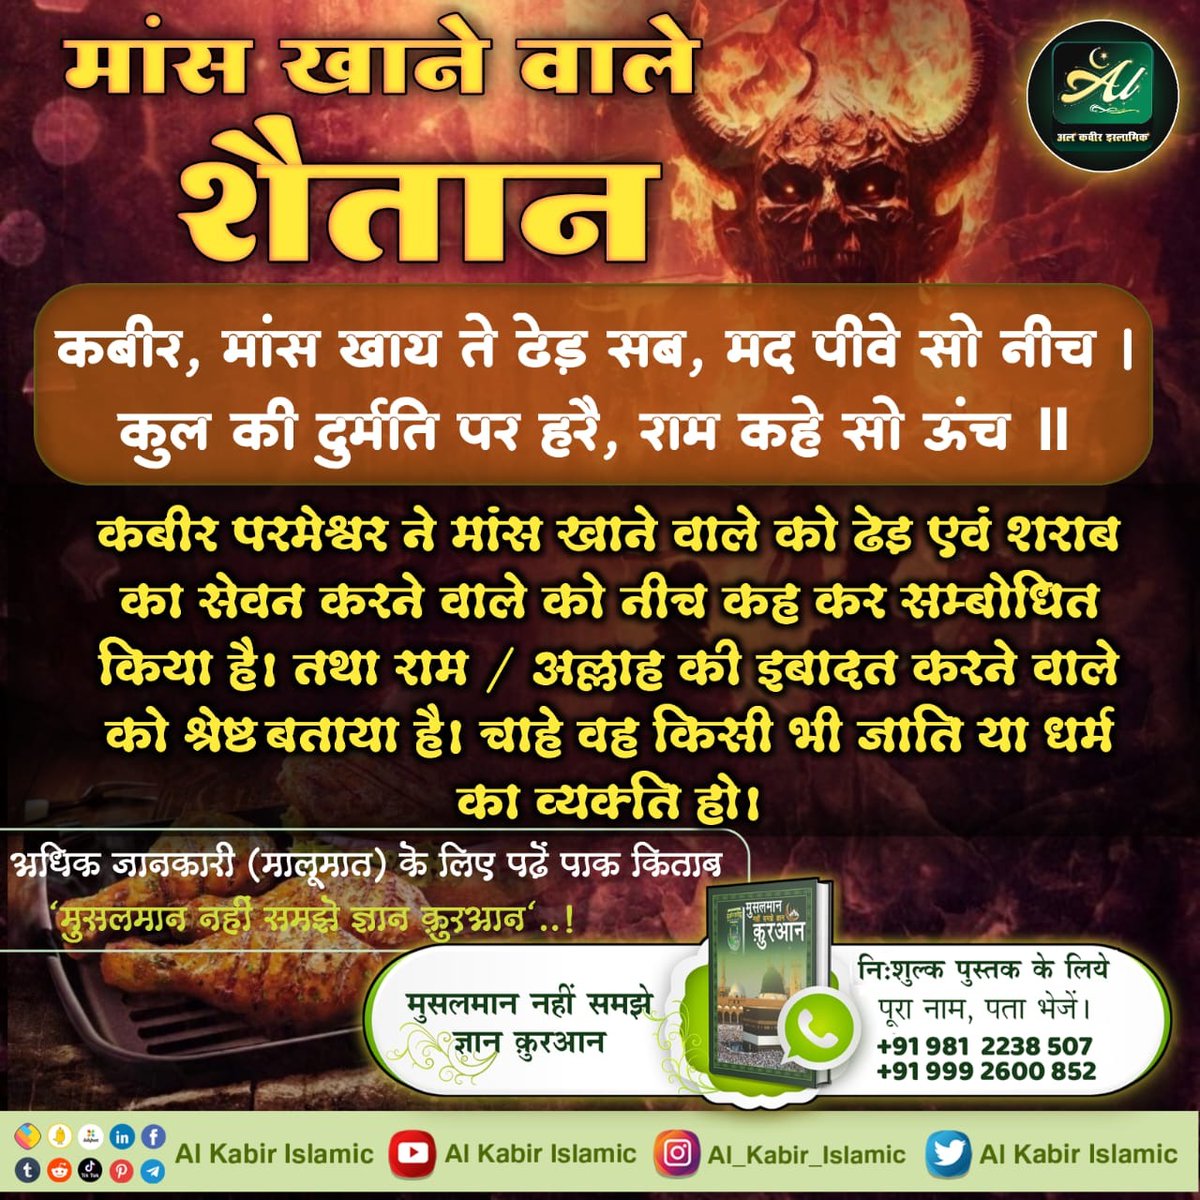 #RealKnowledgeOfIslam Killing innocent animals is a sin! Muslims say that while fasting during the month of Ramzan, they refrain from any sinful activities. Did you even think that killing an innocent animal for food to break the fast, Is not a sin??